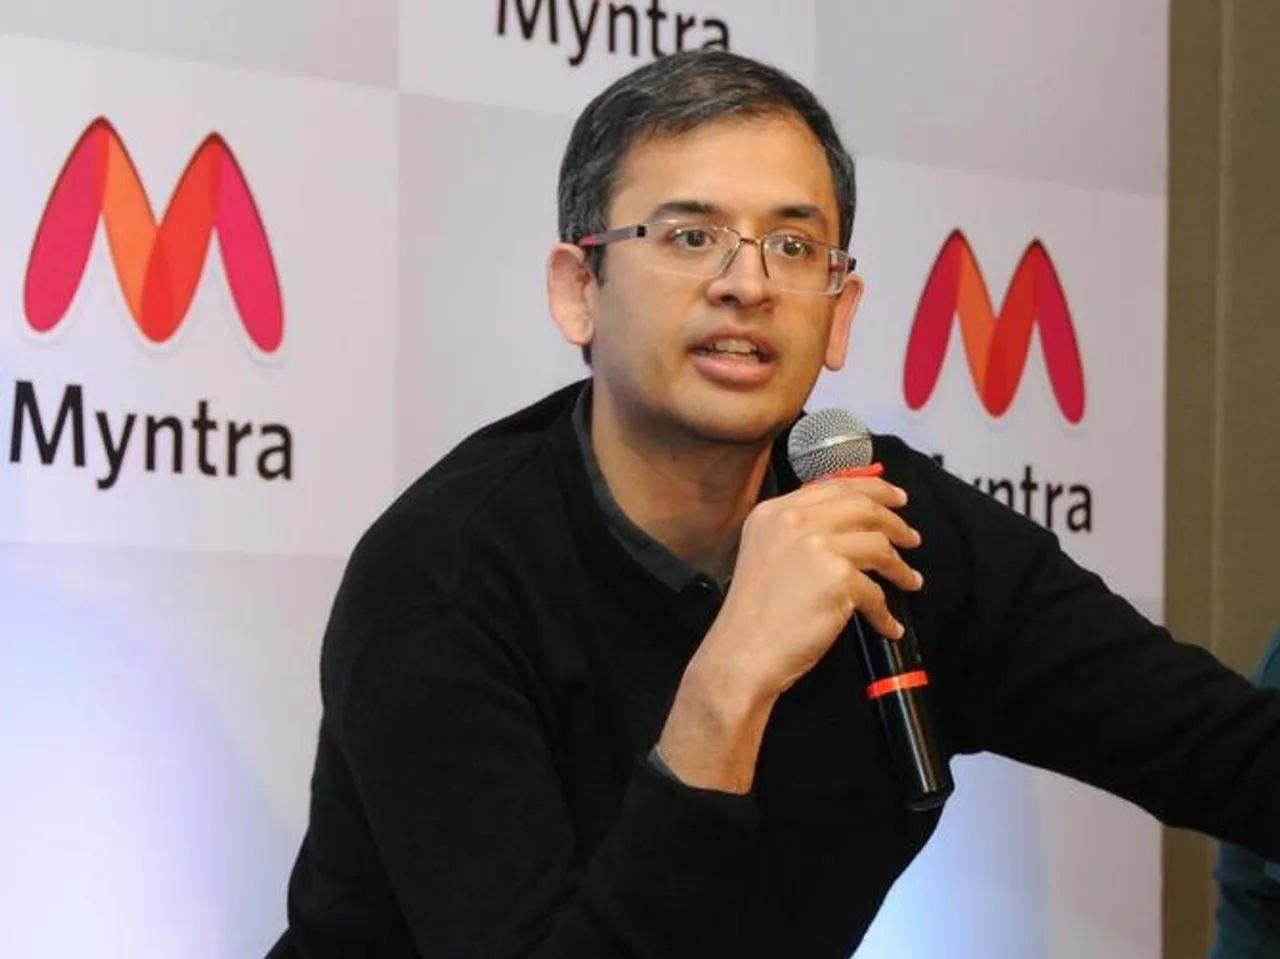 CIOL Myntra gives up on mobile only strategy, relaunches website